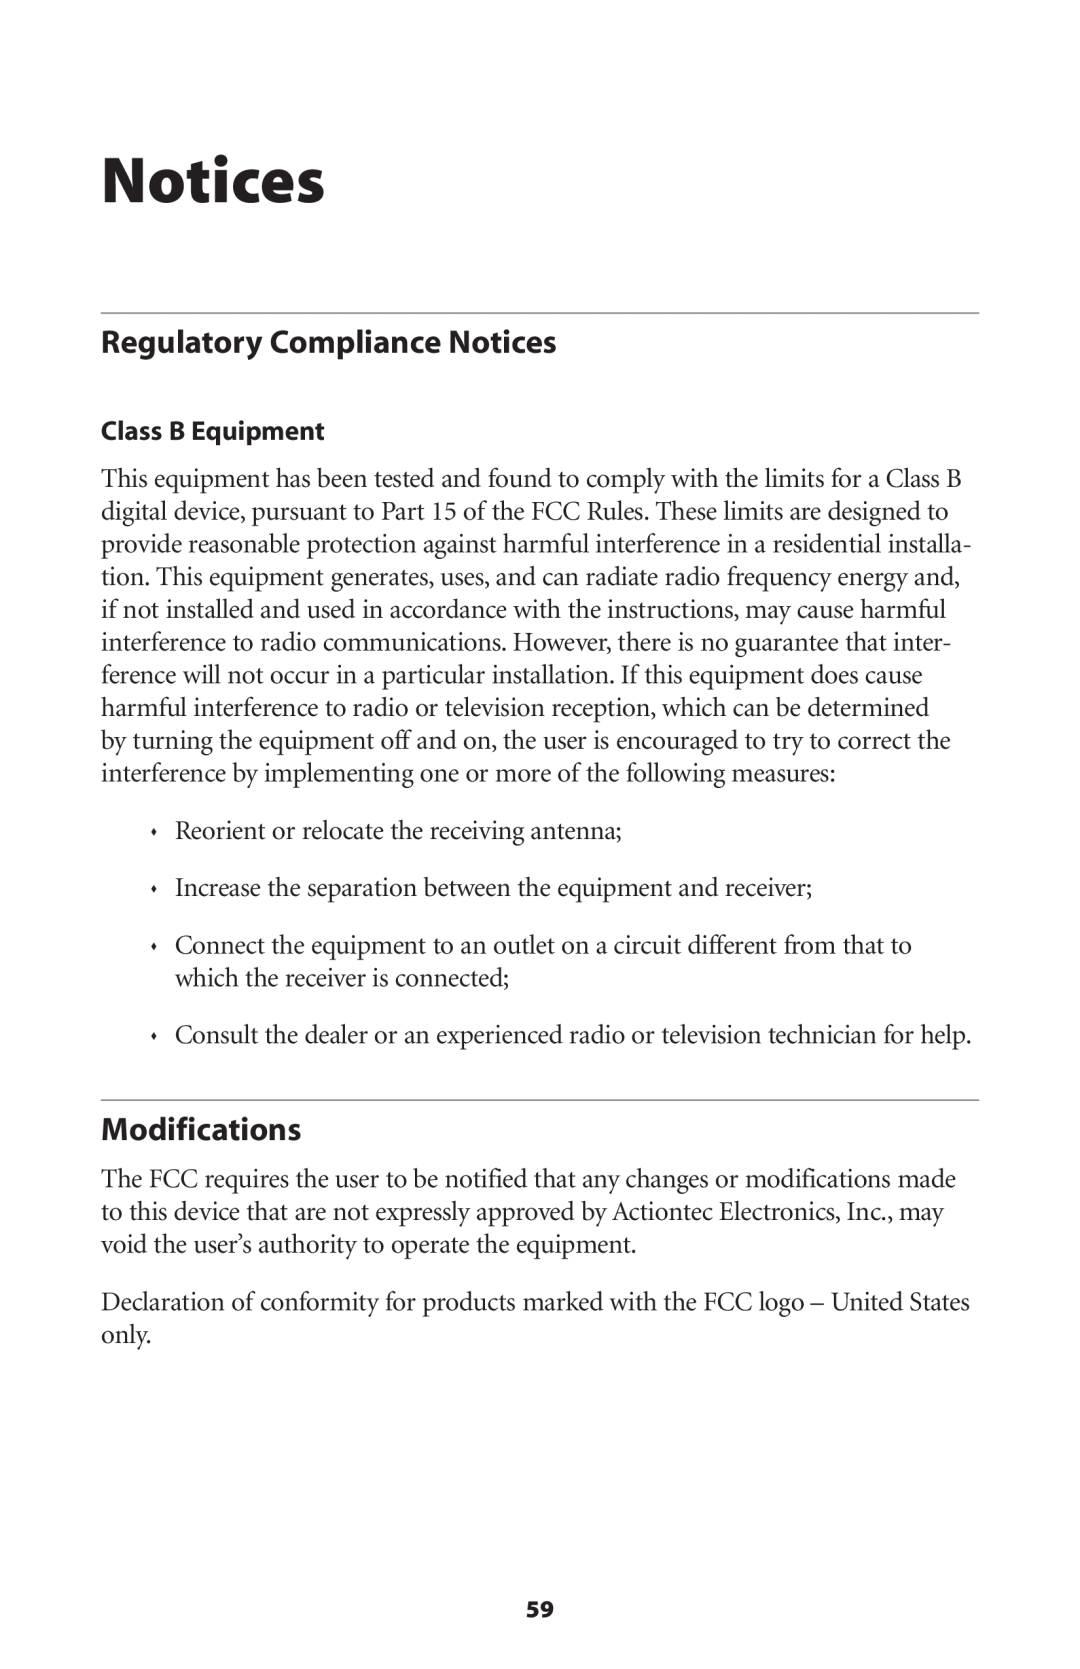 Actiontec electronic WNS100-160, WNS100-250, WNS100-200, WNS100-400 manual Regulatory Compliance Notices, Modifications 